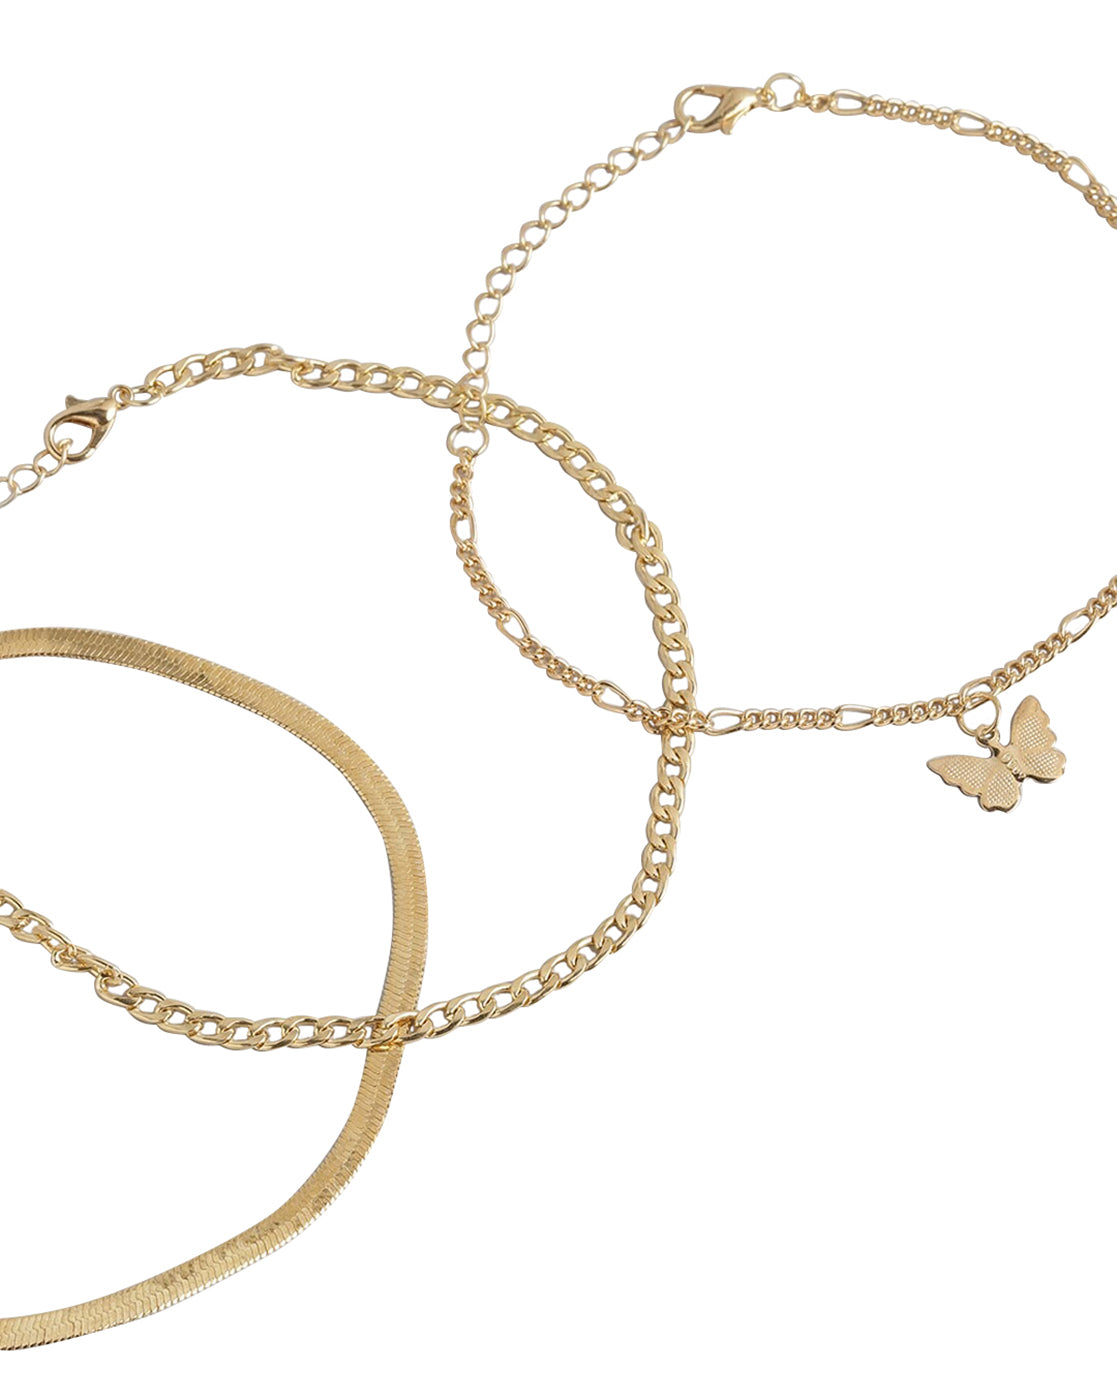 Carlton London Set Of 3 Gold-Toned Stackable Butterfly Shape Anklet For Women